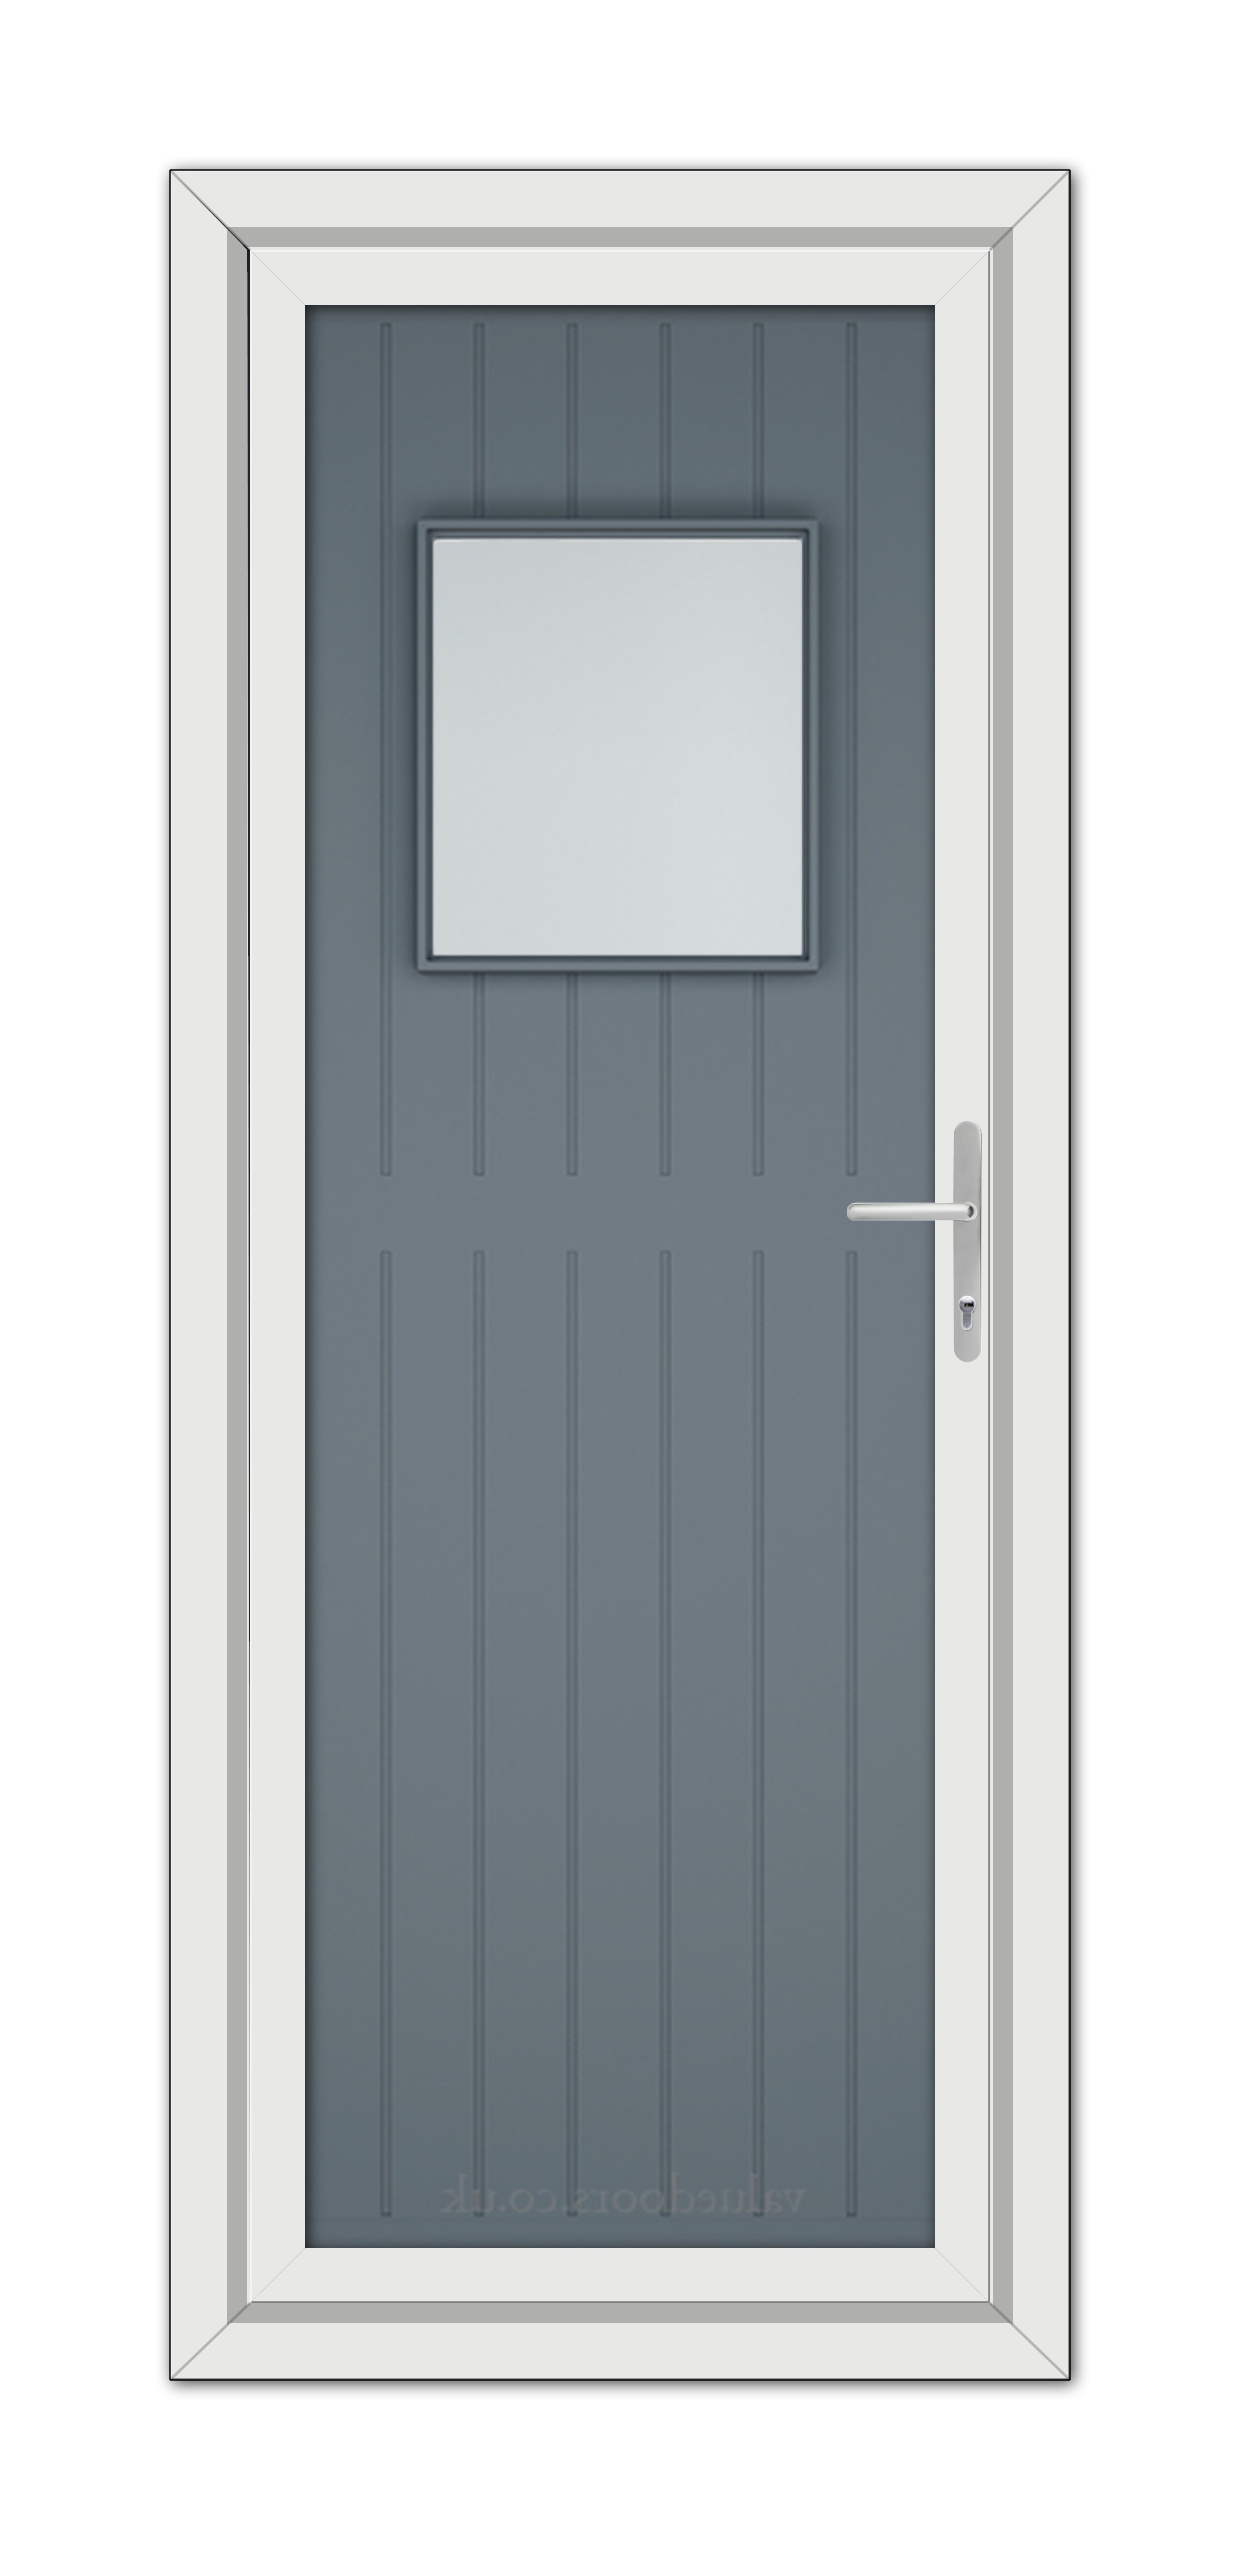 Slate Grey Chatsworth uPVC Door with a small square window and white frame, featuring a silver handle on the right side.